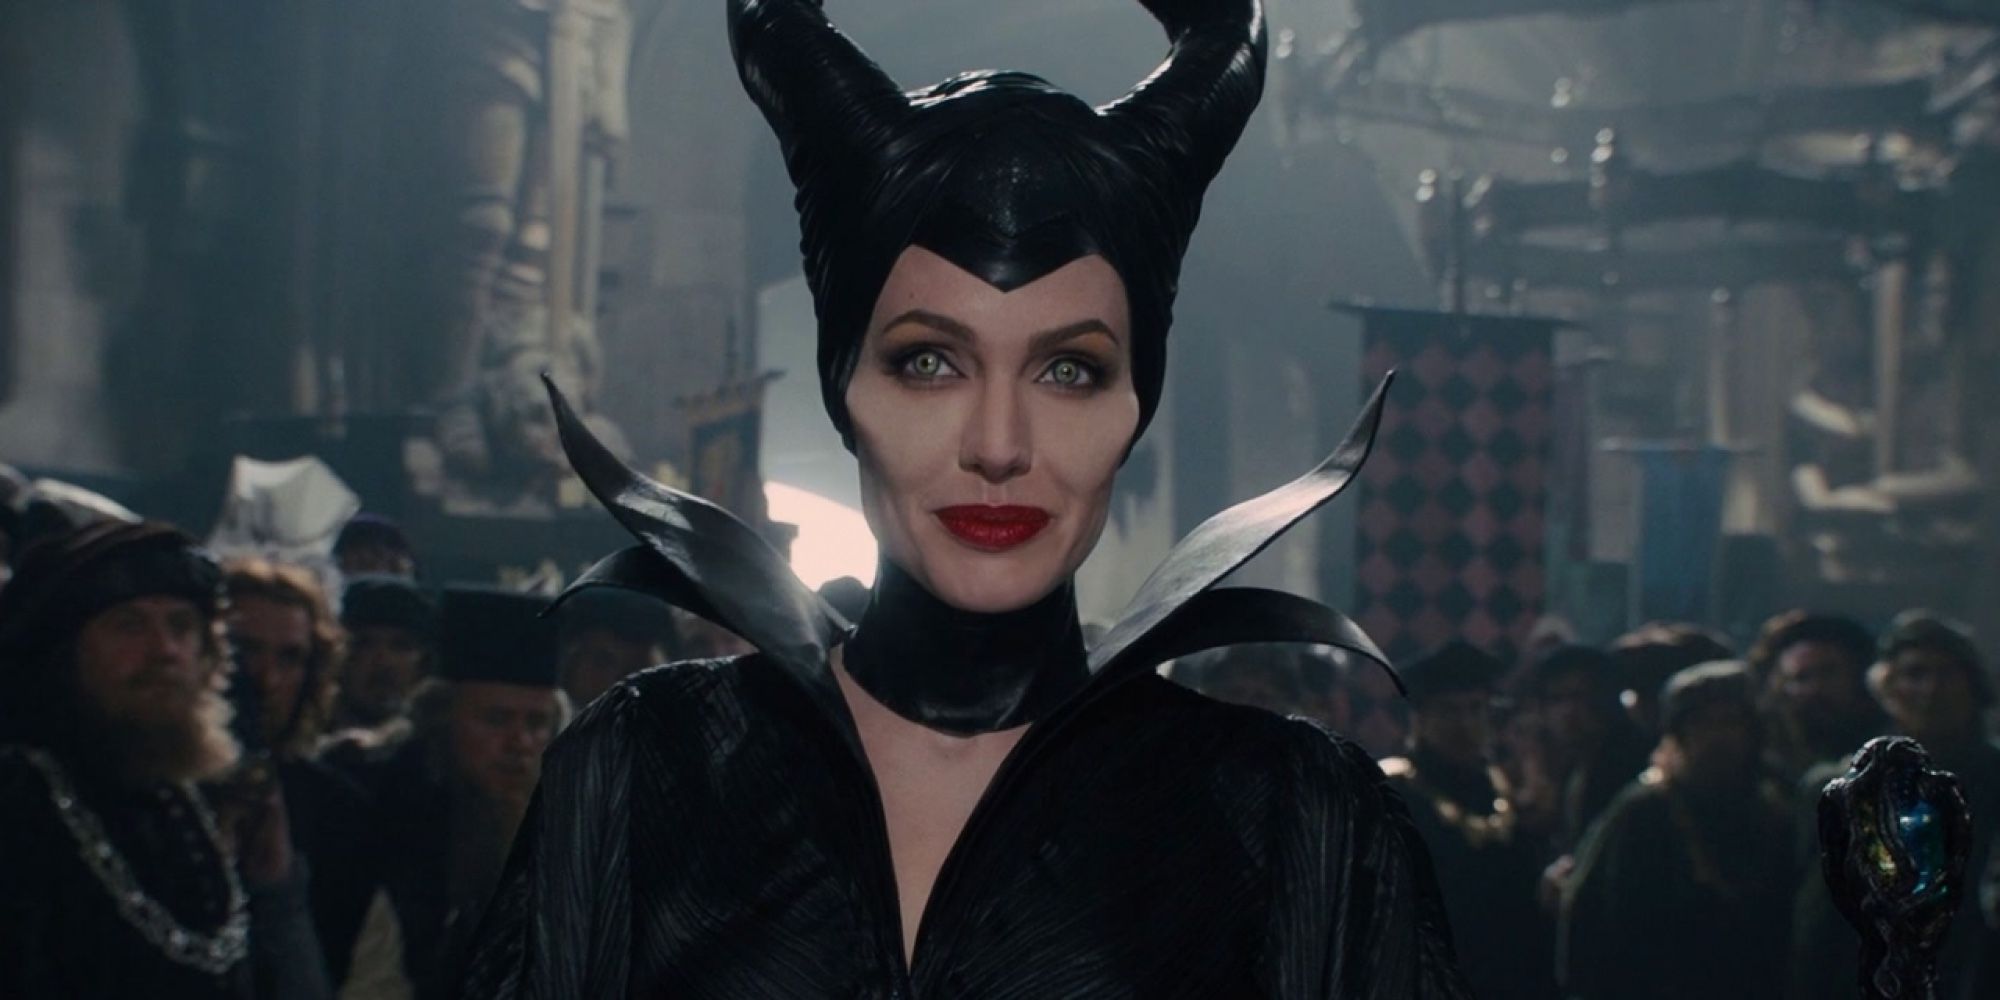 Maleficent smiles, as she walks through a crowd of people. 